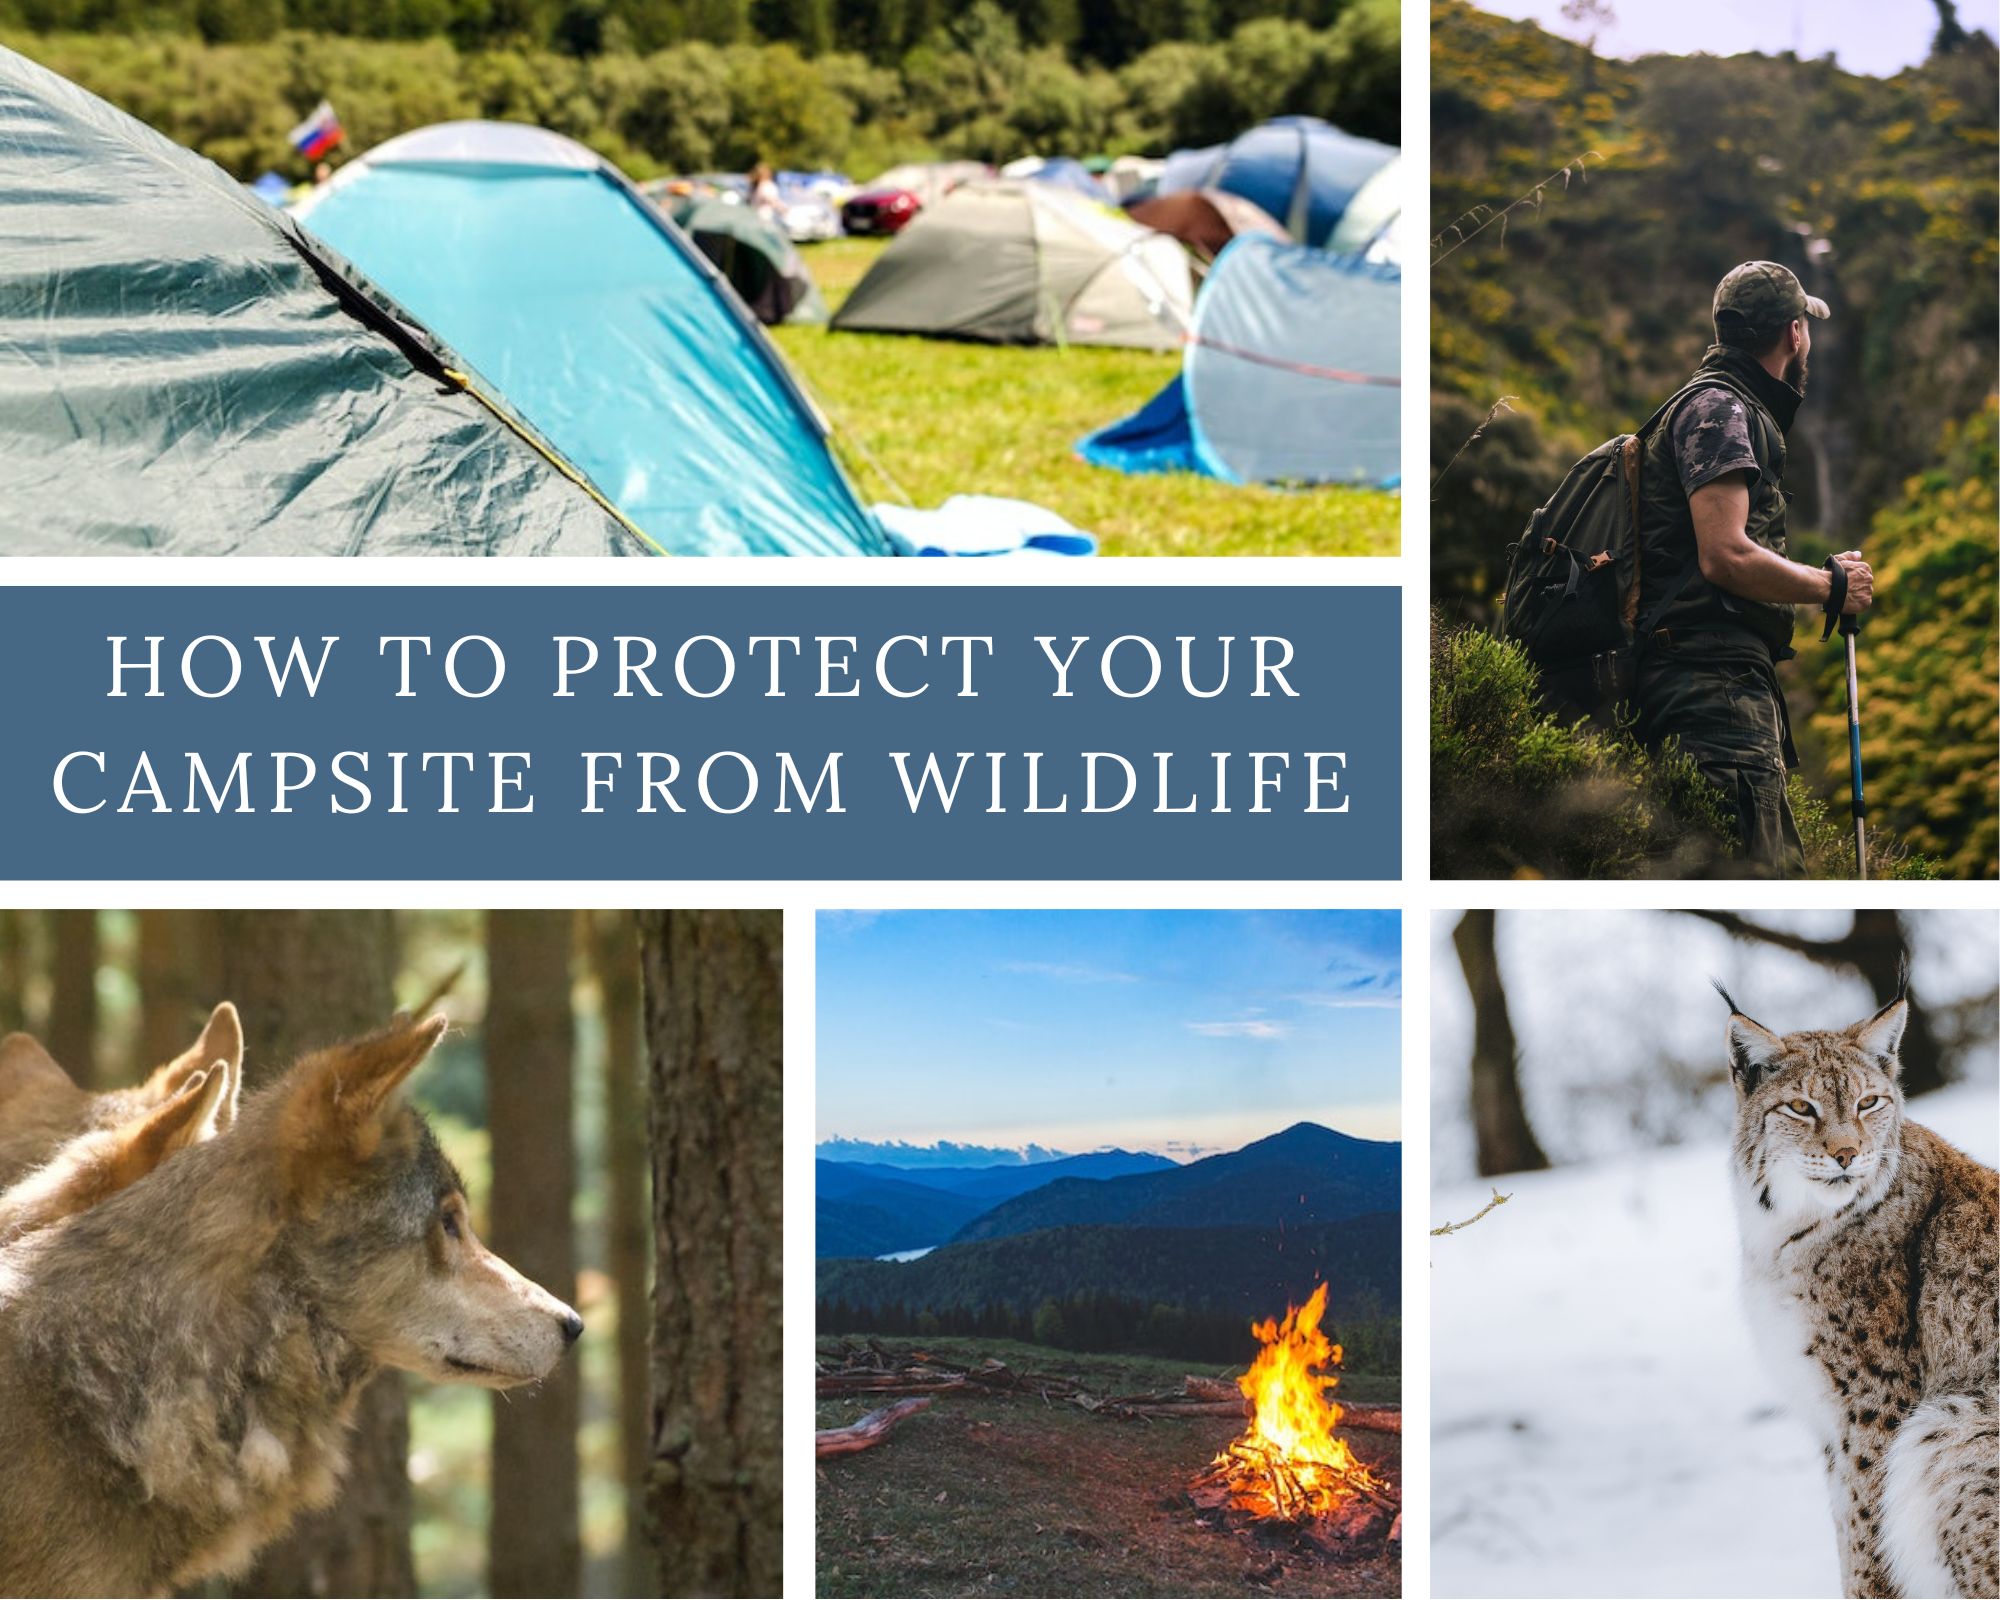 How to Protect your Campsite from Wildlife